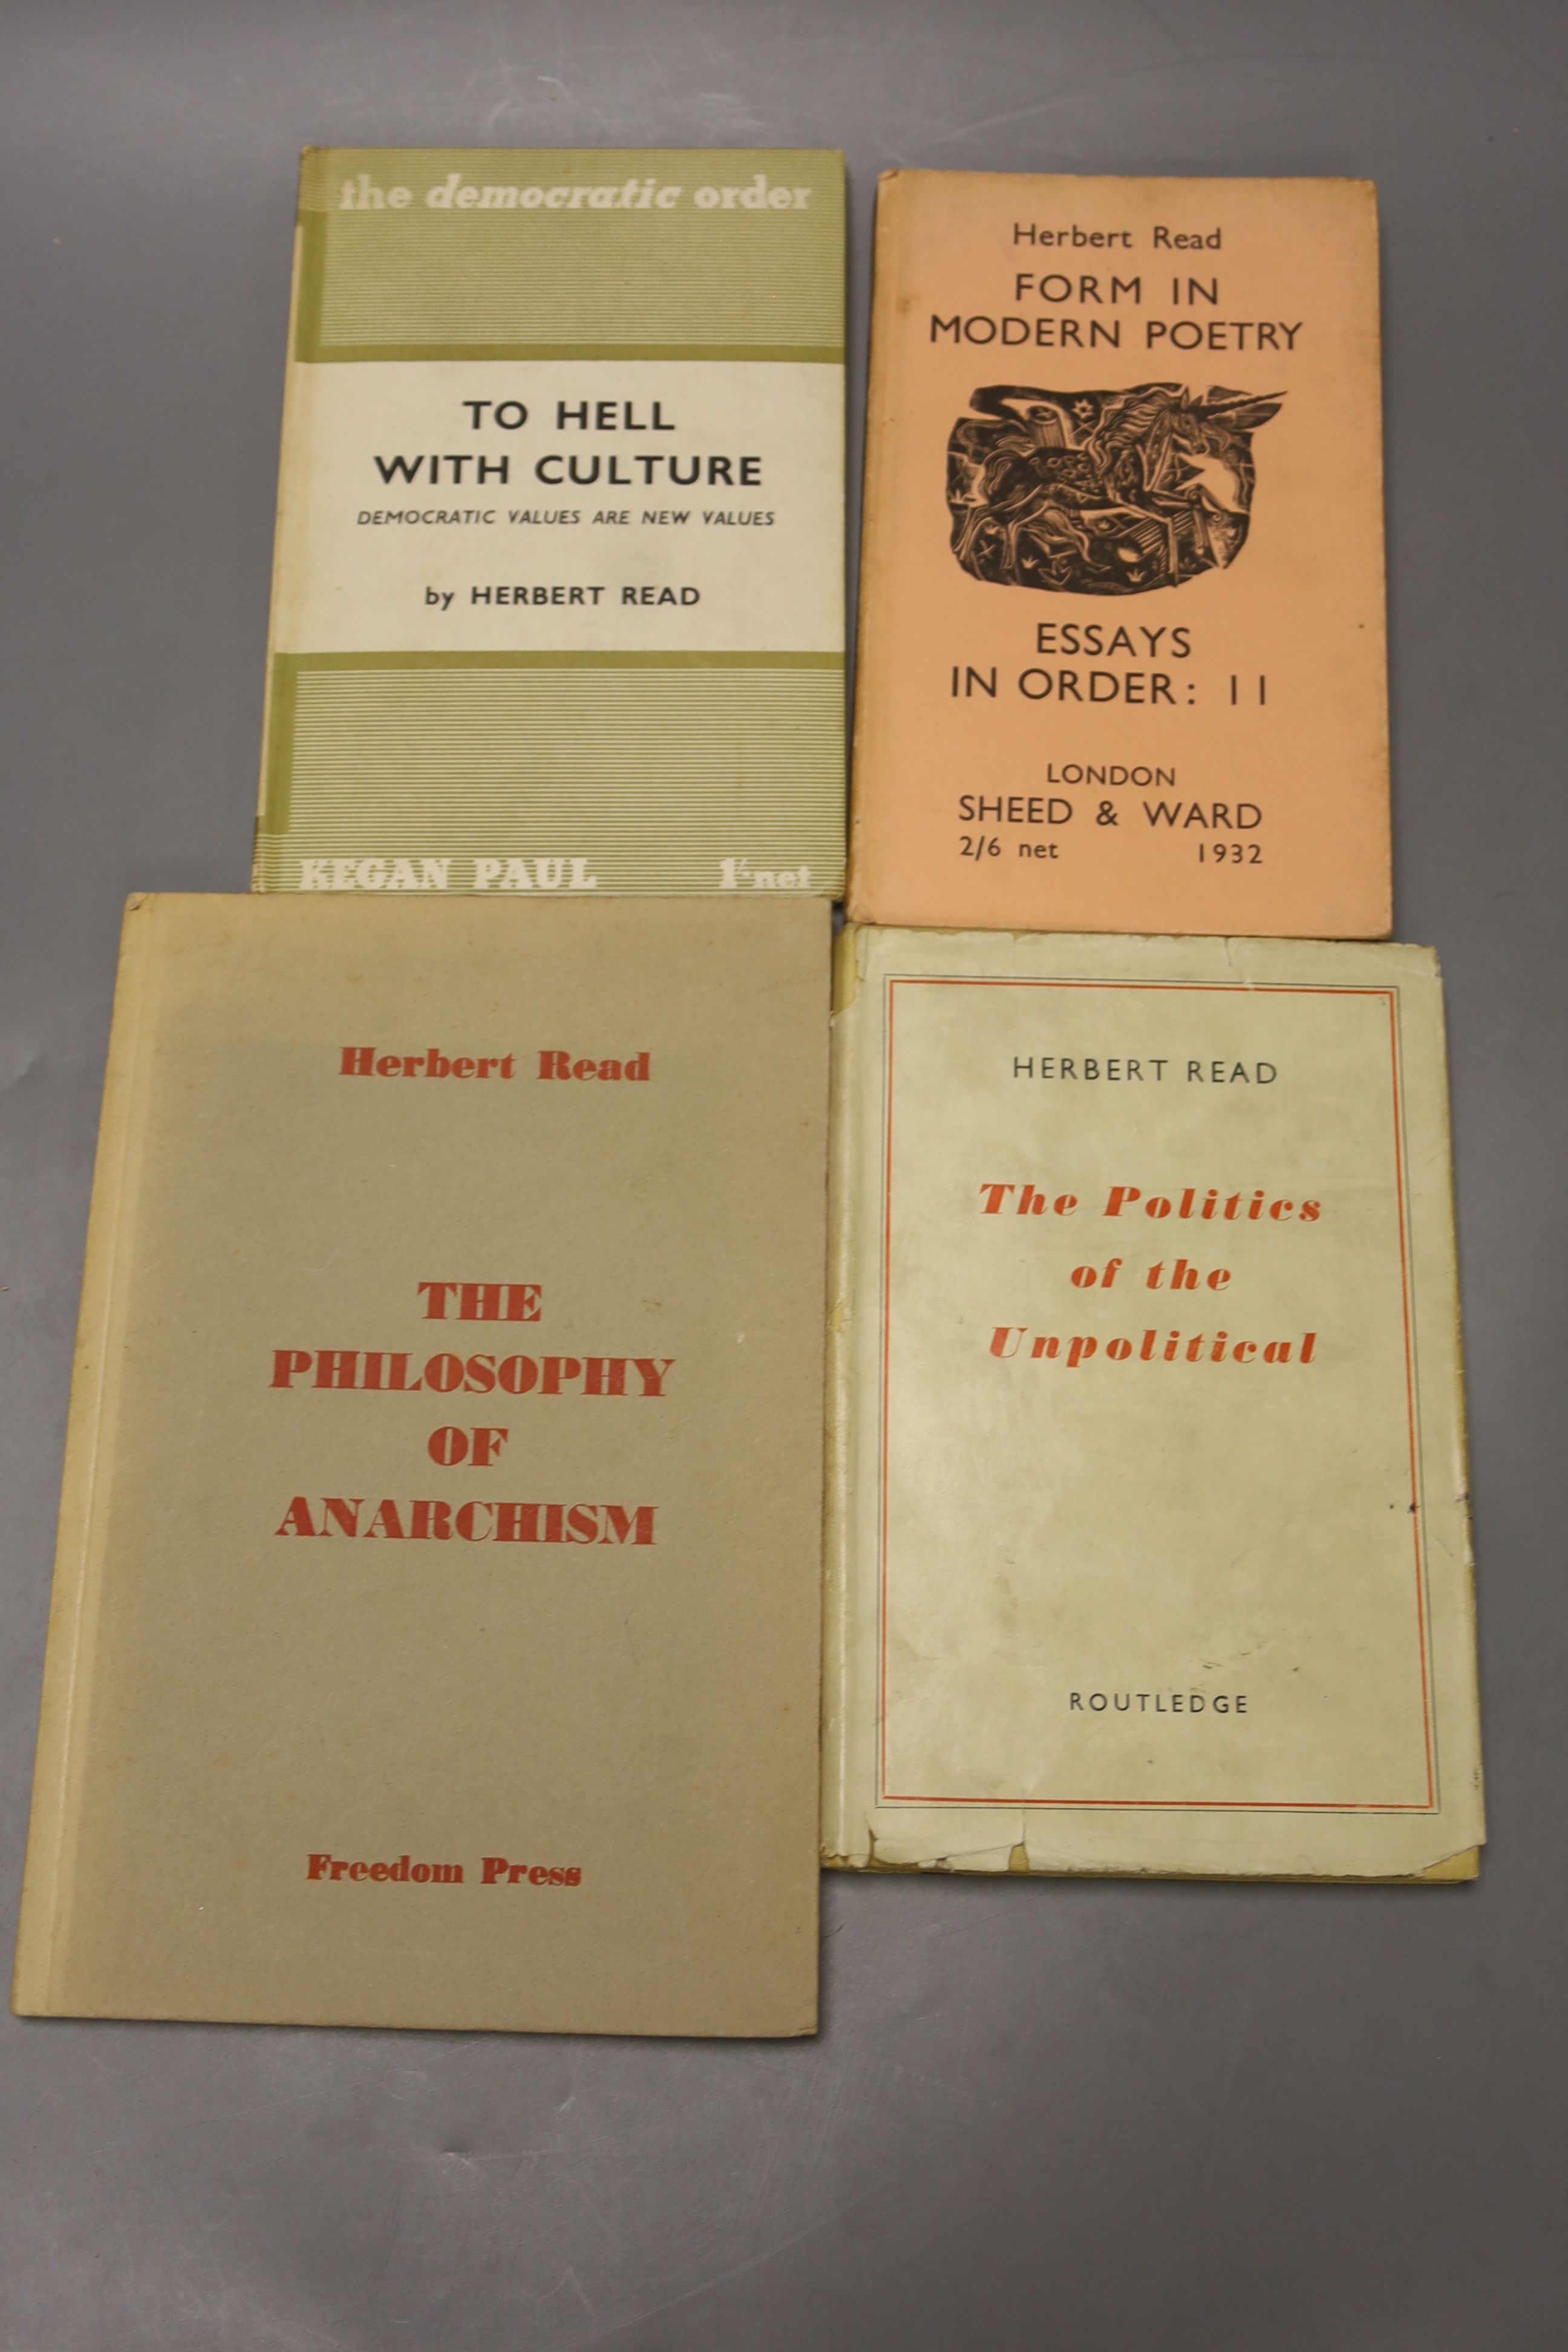 Read, Herbert – The Philosophy of Anarchism, limited edition (500 numbered copies), printed boards, Freedom Press Distributors, 1940; together with 3 others by this author